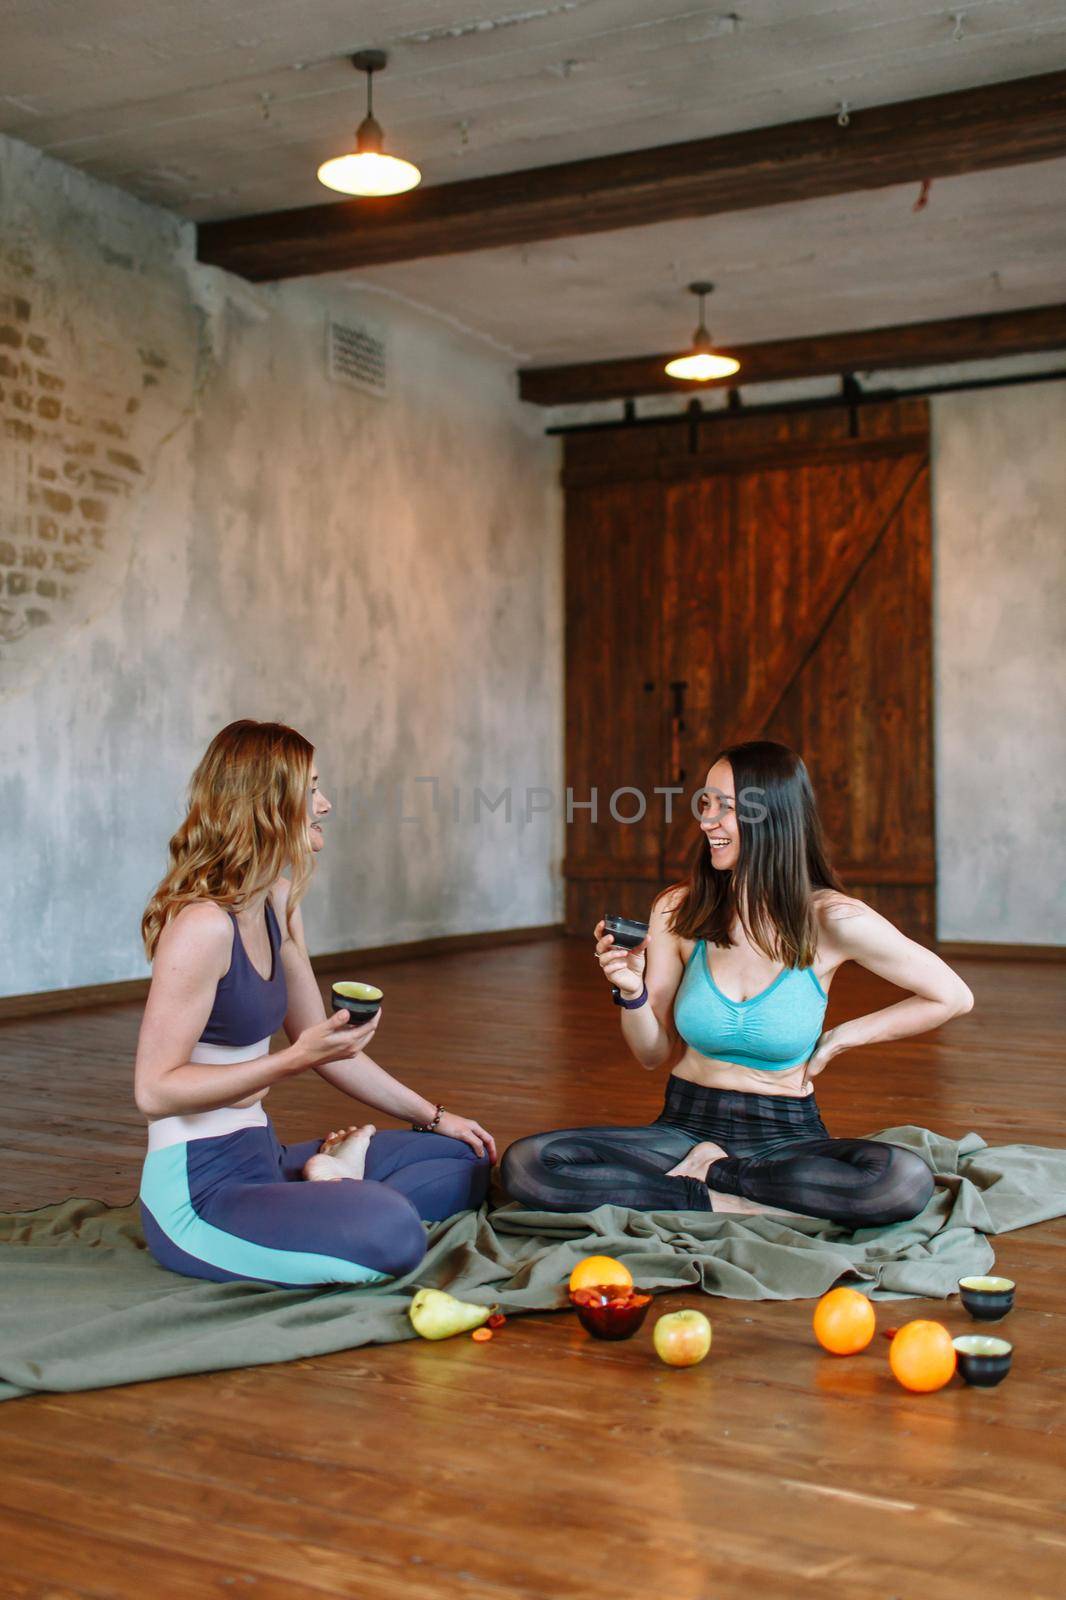 Conversation and tea party of two yogis in the loft